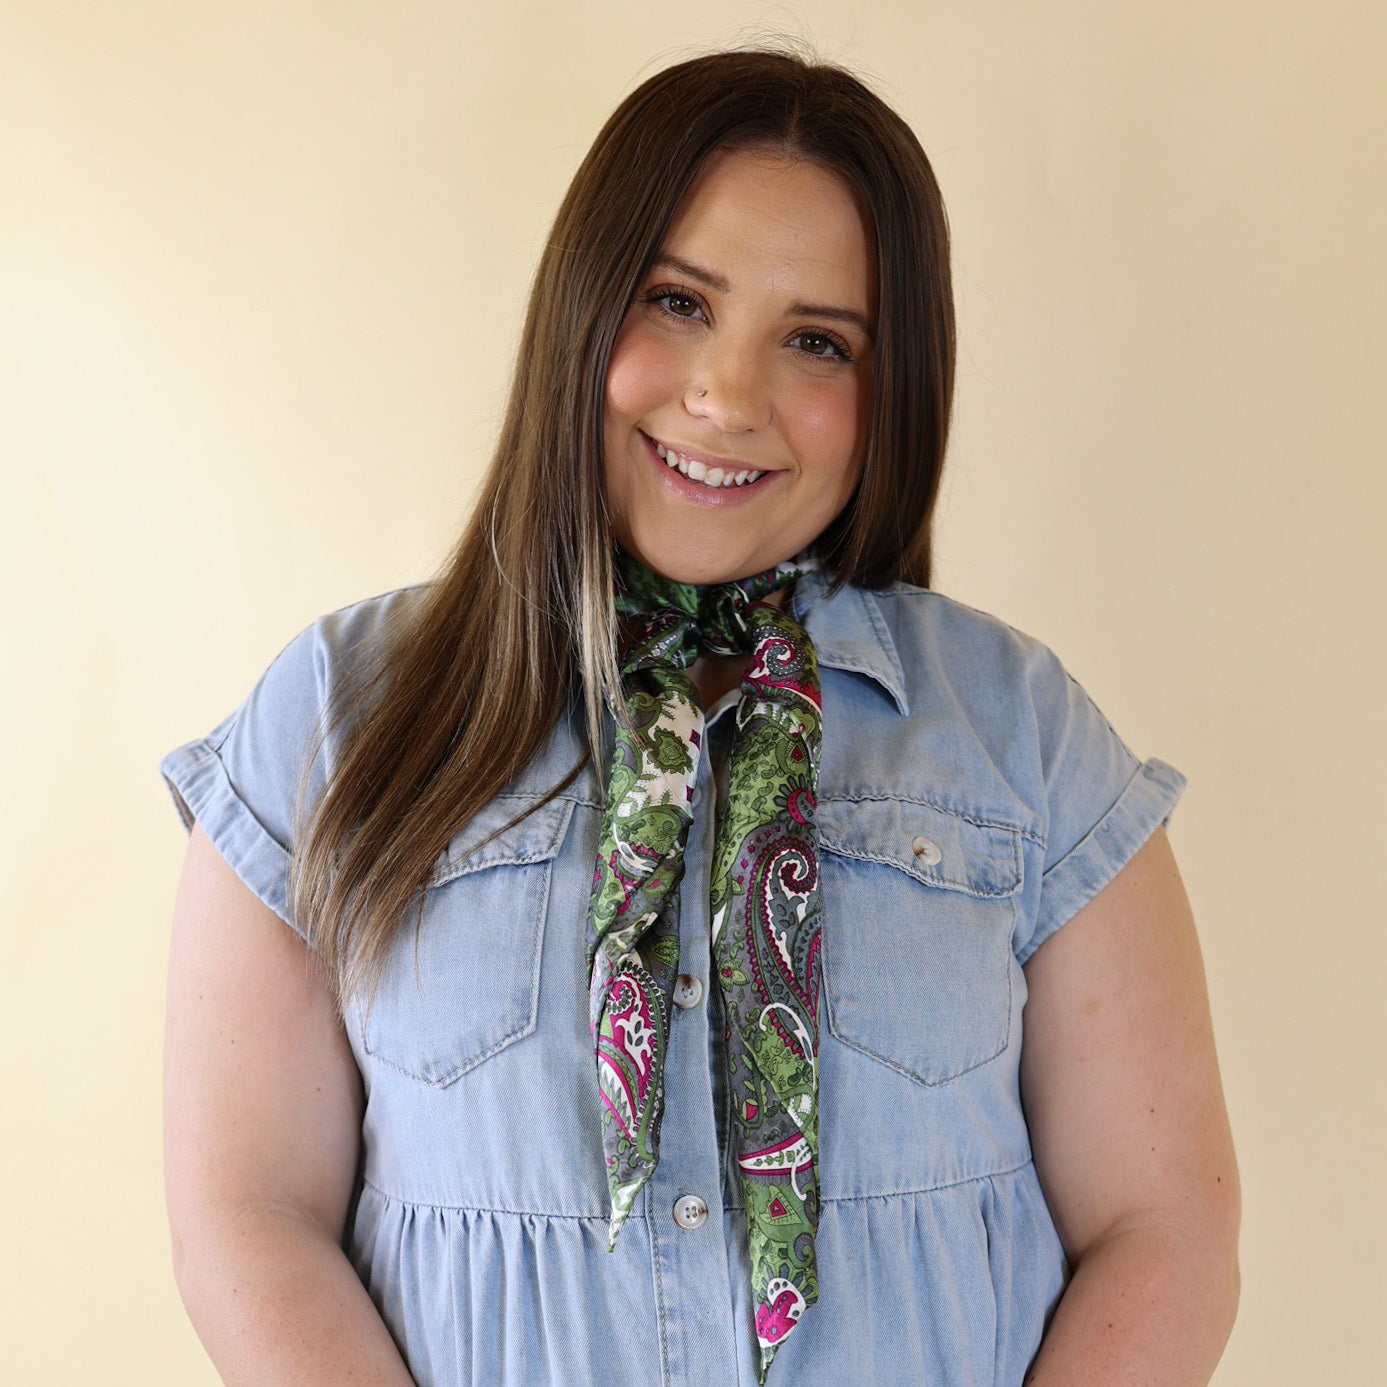 Brunette model is pictured wearing a denim button up top and a green, white, and pink printed scarf tied around her neck. She is pictured in front of a beige background. 